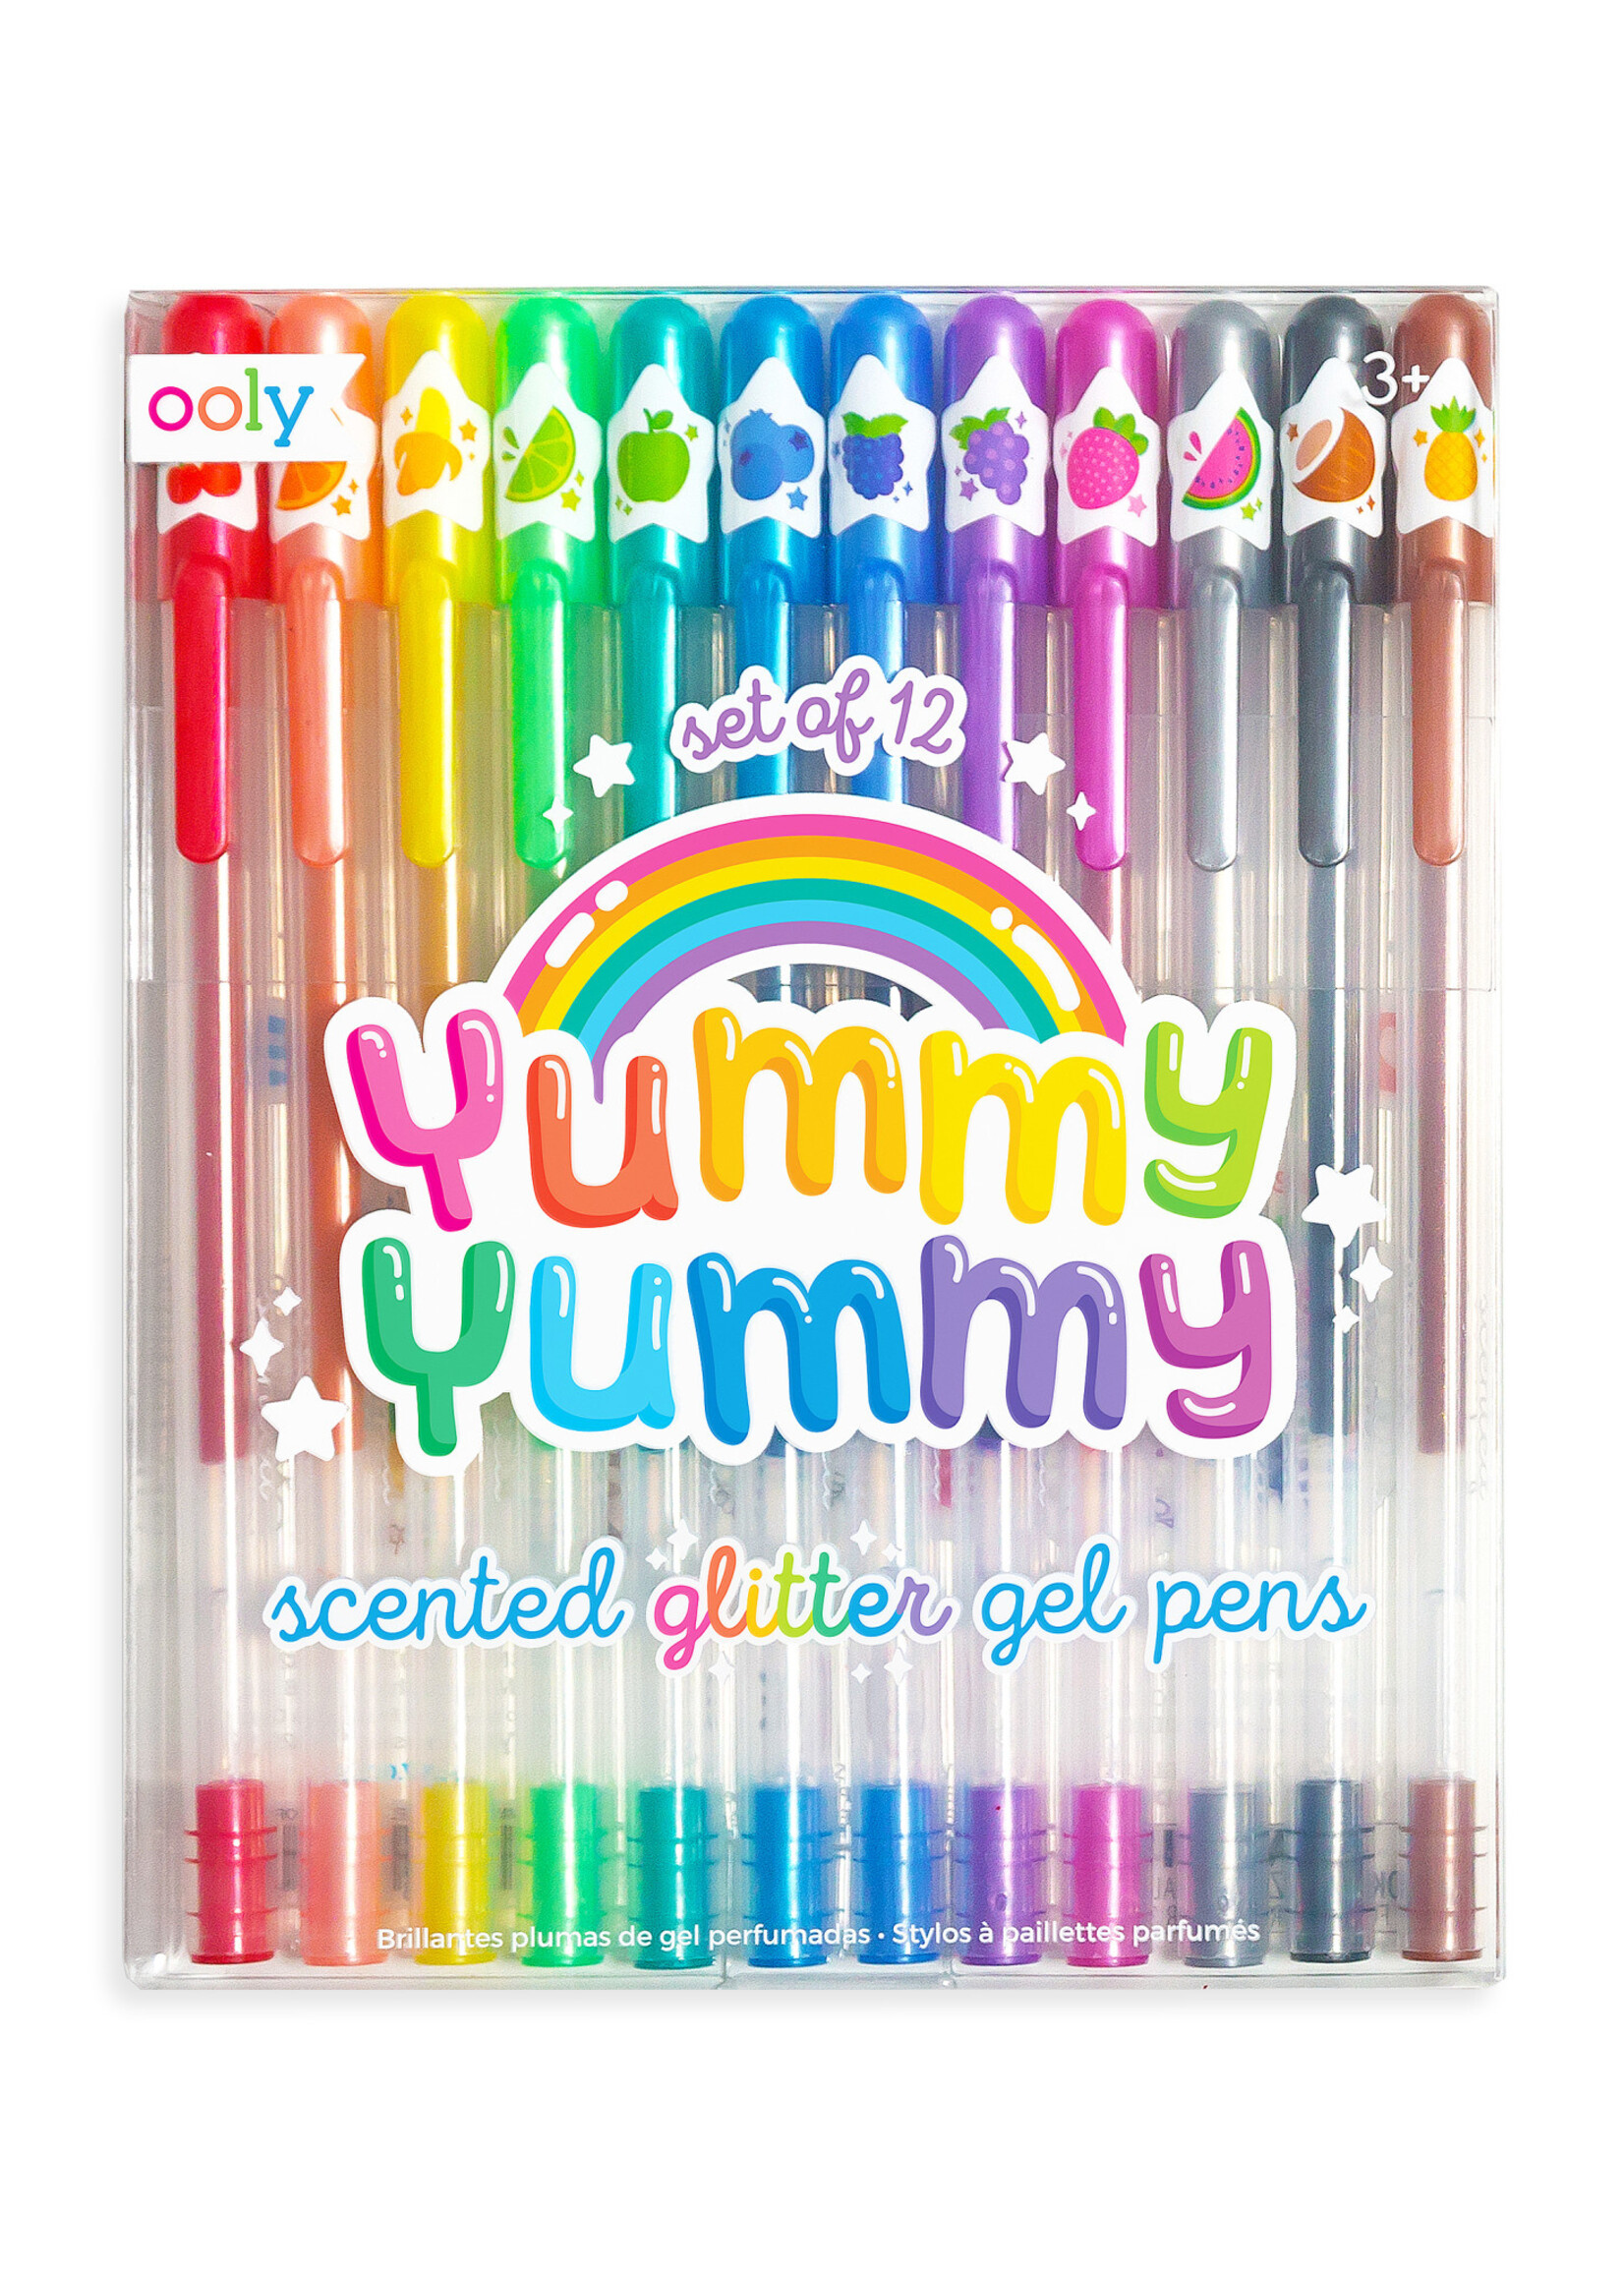 Ooly Ooly - Yummy Yummy Scented Glitter Gel Pens